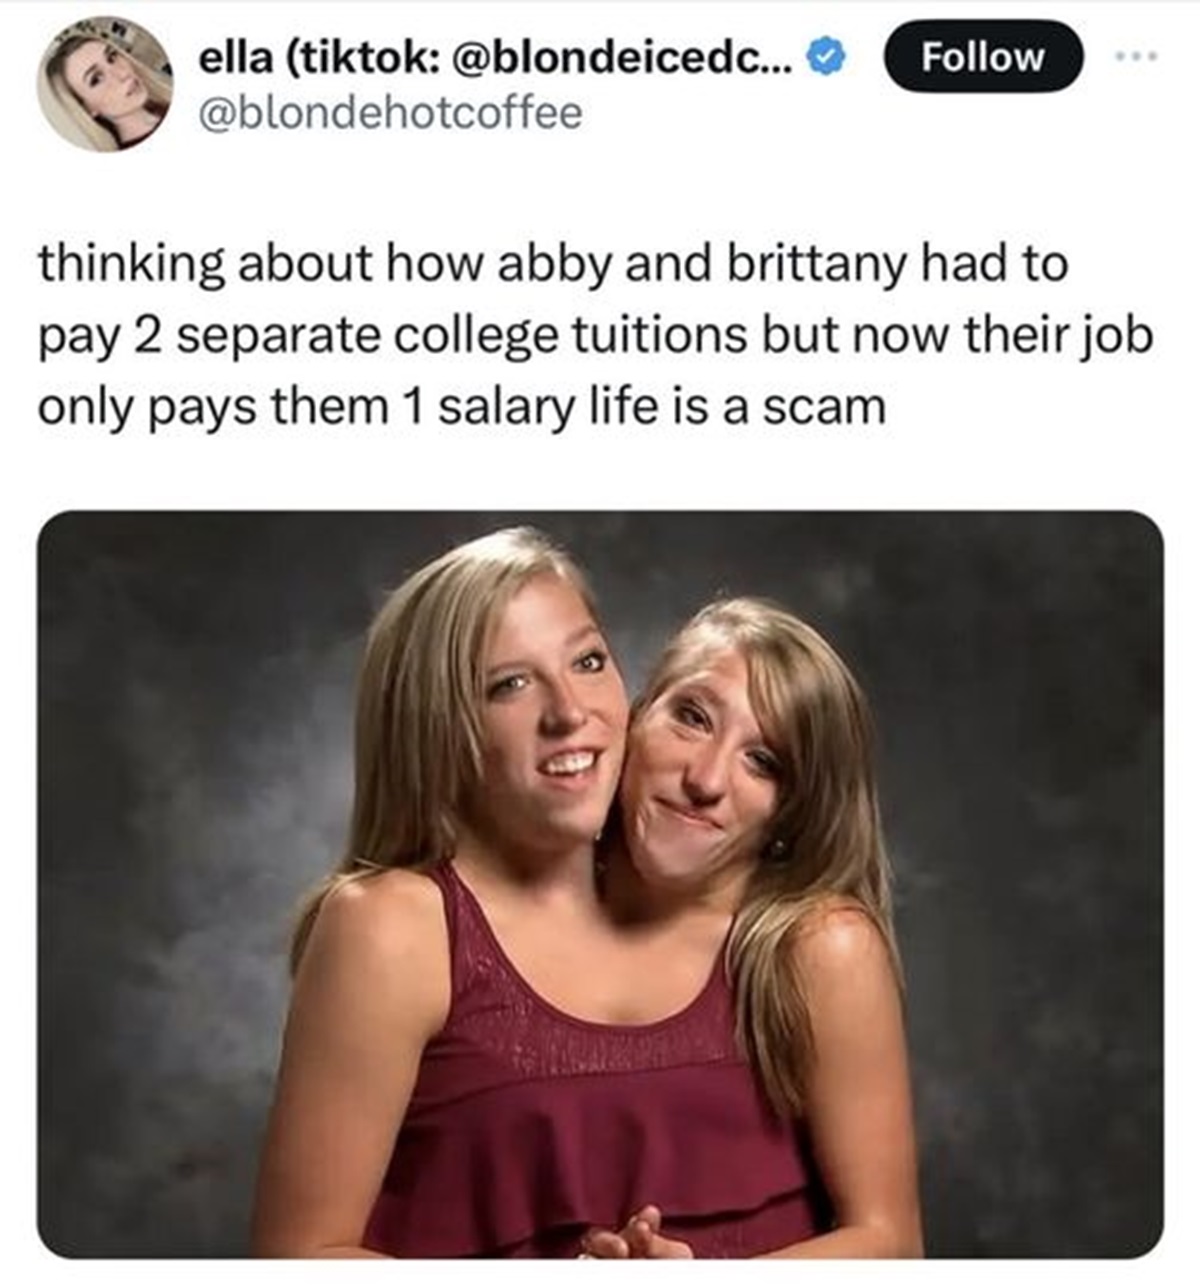 brittany et abby - ella tiktok ... thinking about how abby and brittany had to pay 2 separate college tuitions but now their job only pays them 1 salary life is a scam